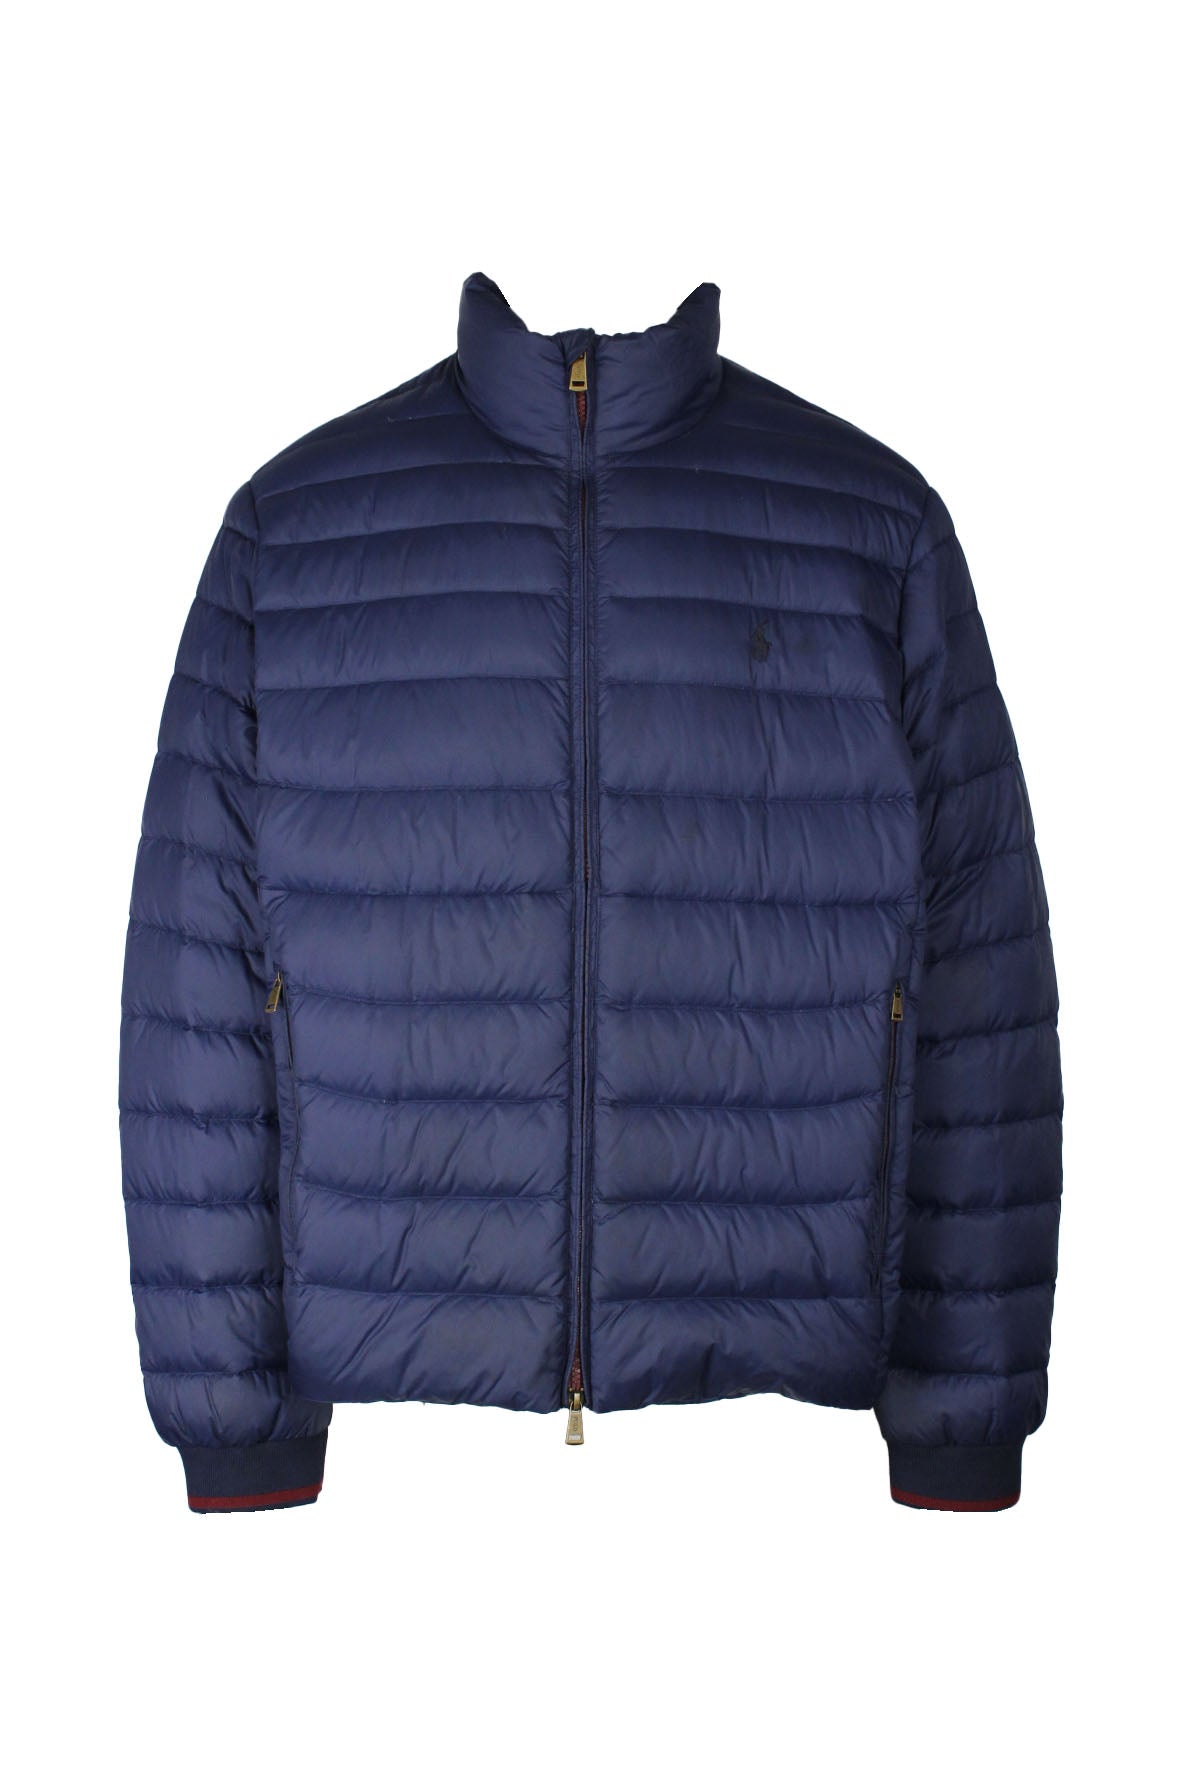 front view of polo ralph lauren navy two way zip up down quilted puffer jacket. features logo embroiderd at left breast, side zip hand pockets, and ribbed cuffs.